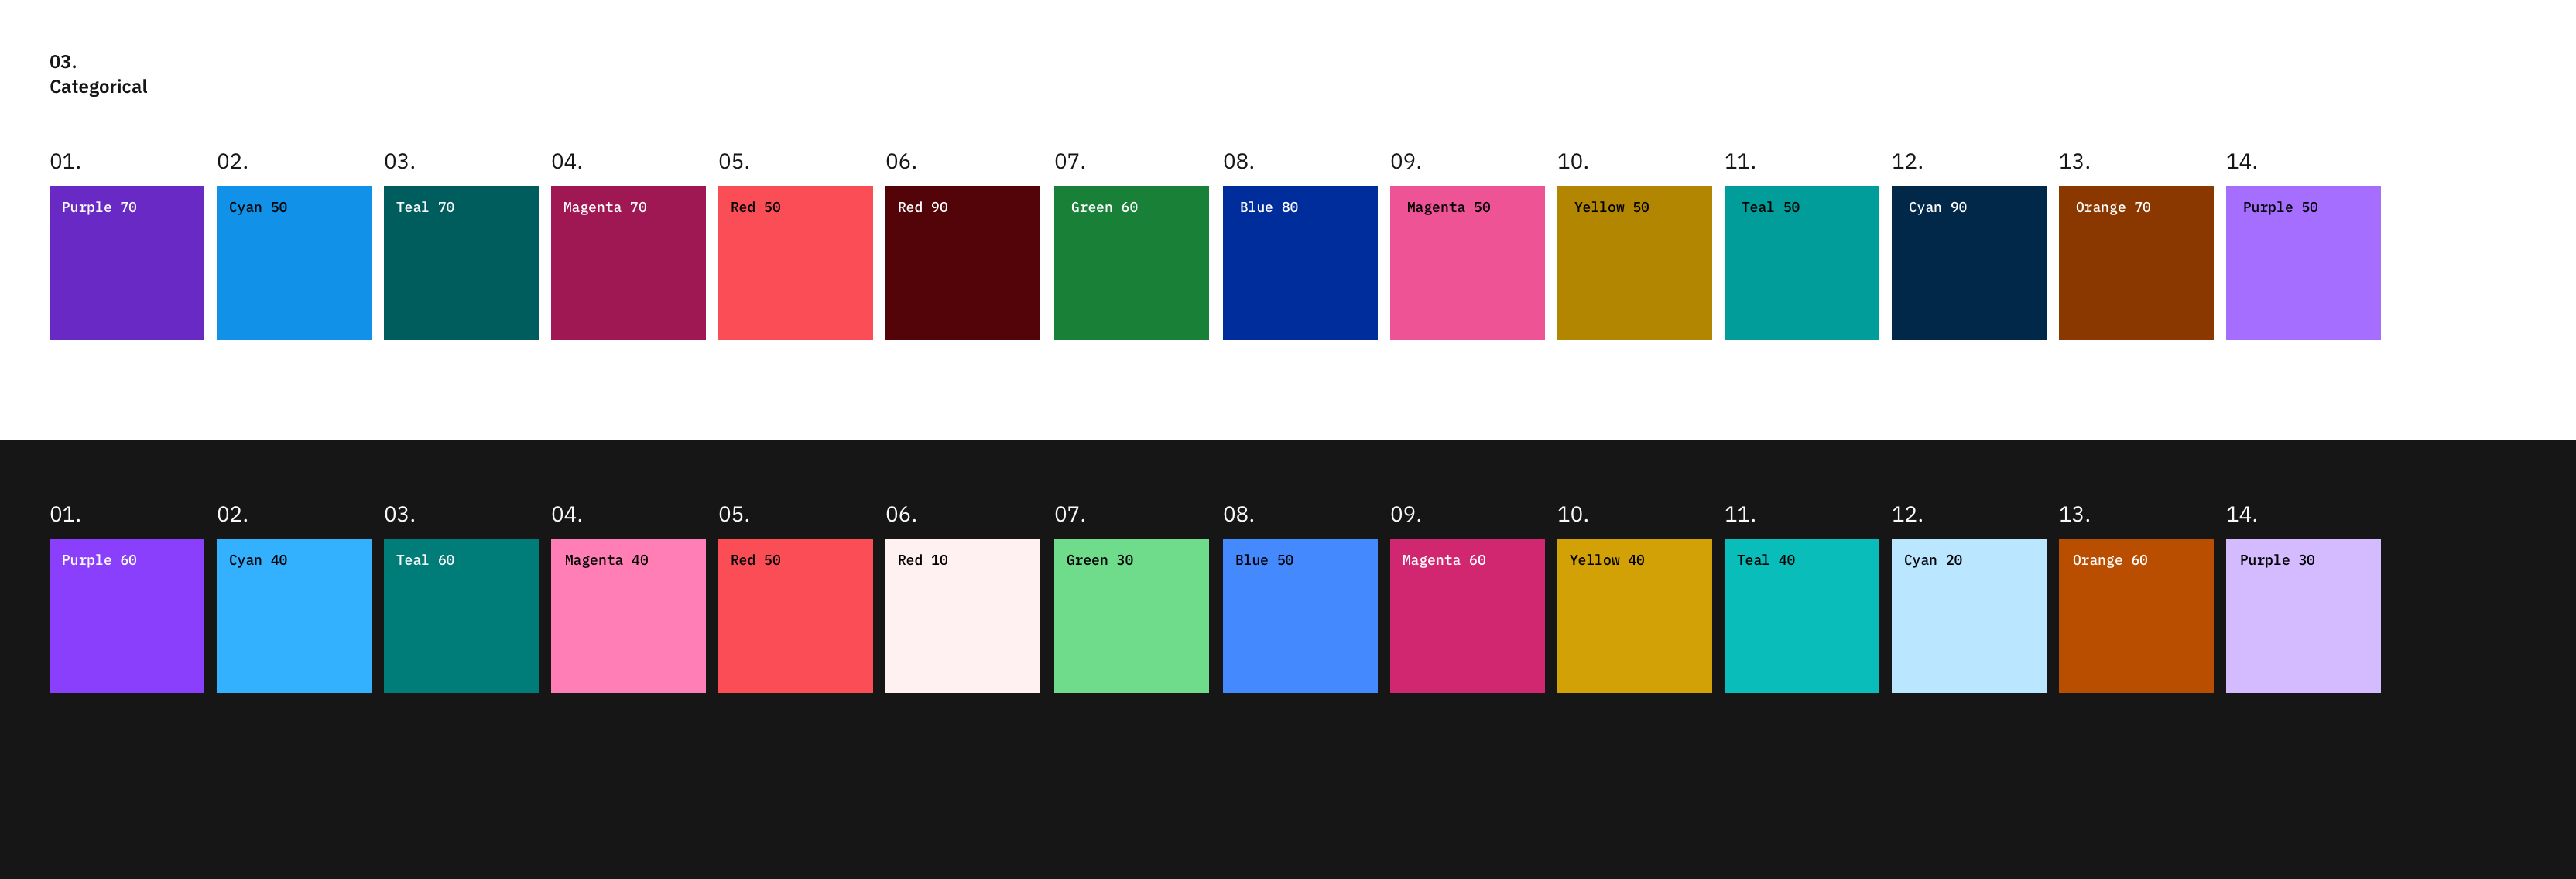 Color palettes and accessibility features for data visualization | by  Shixie | _carbondesign | Medium